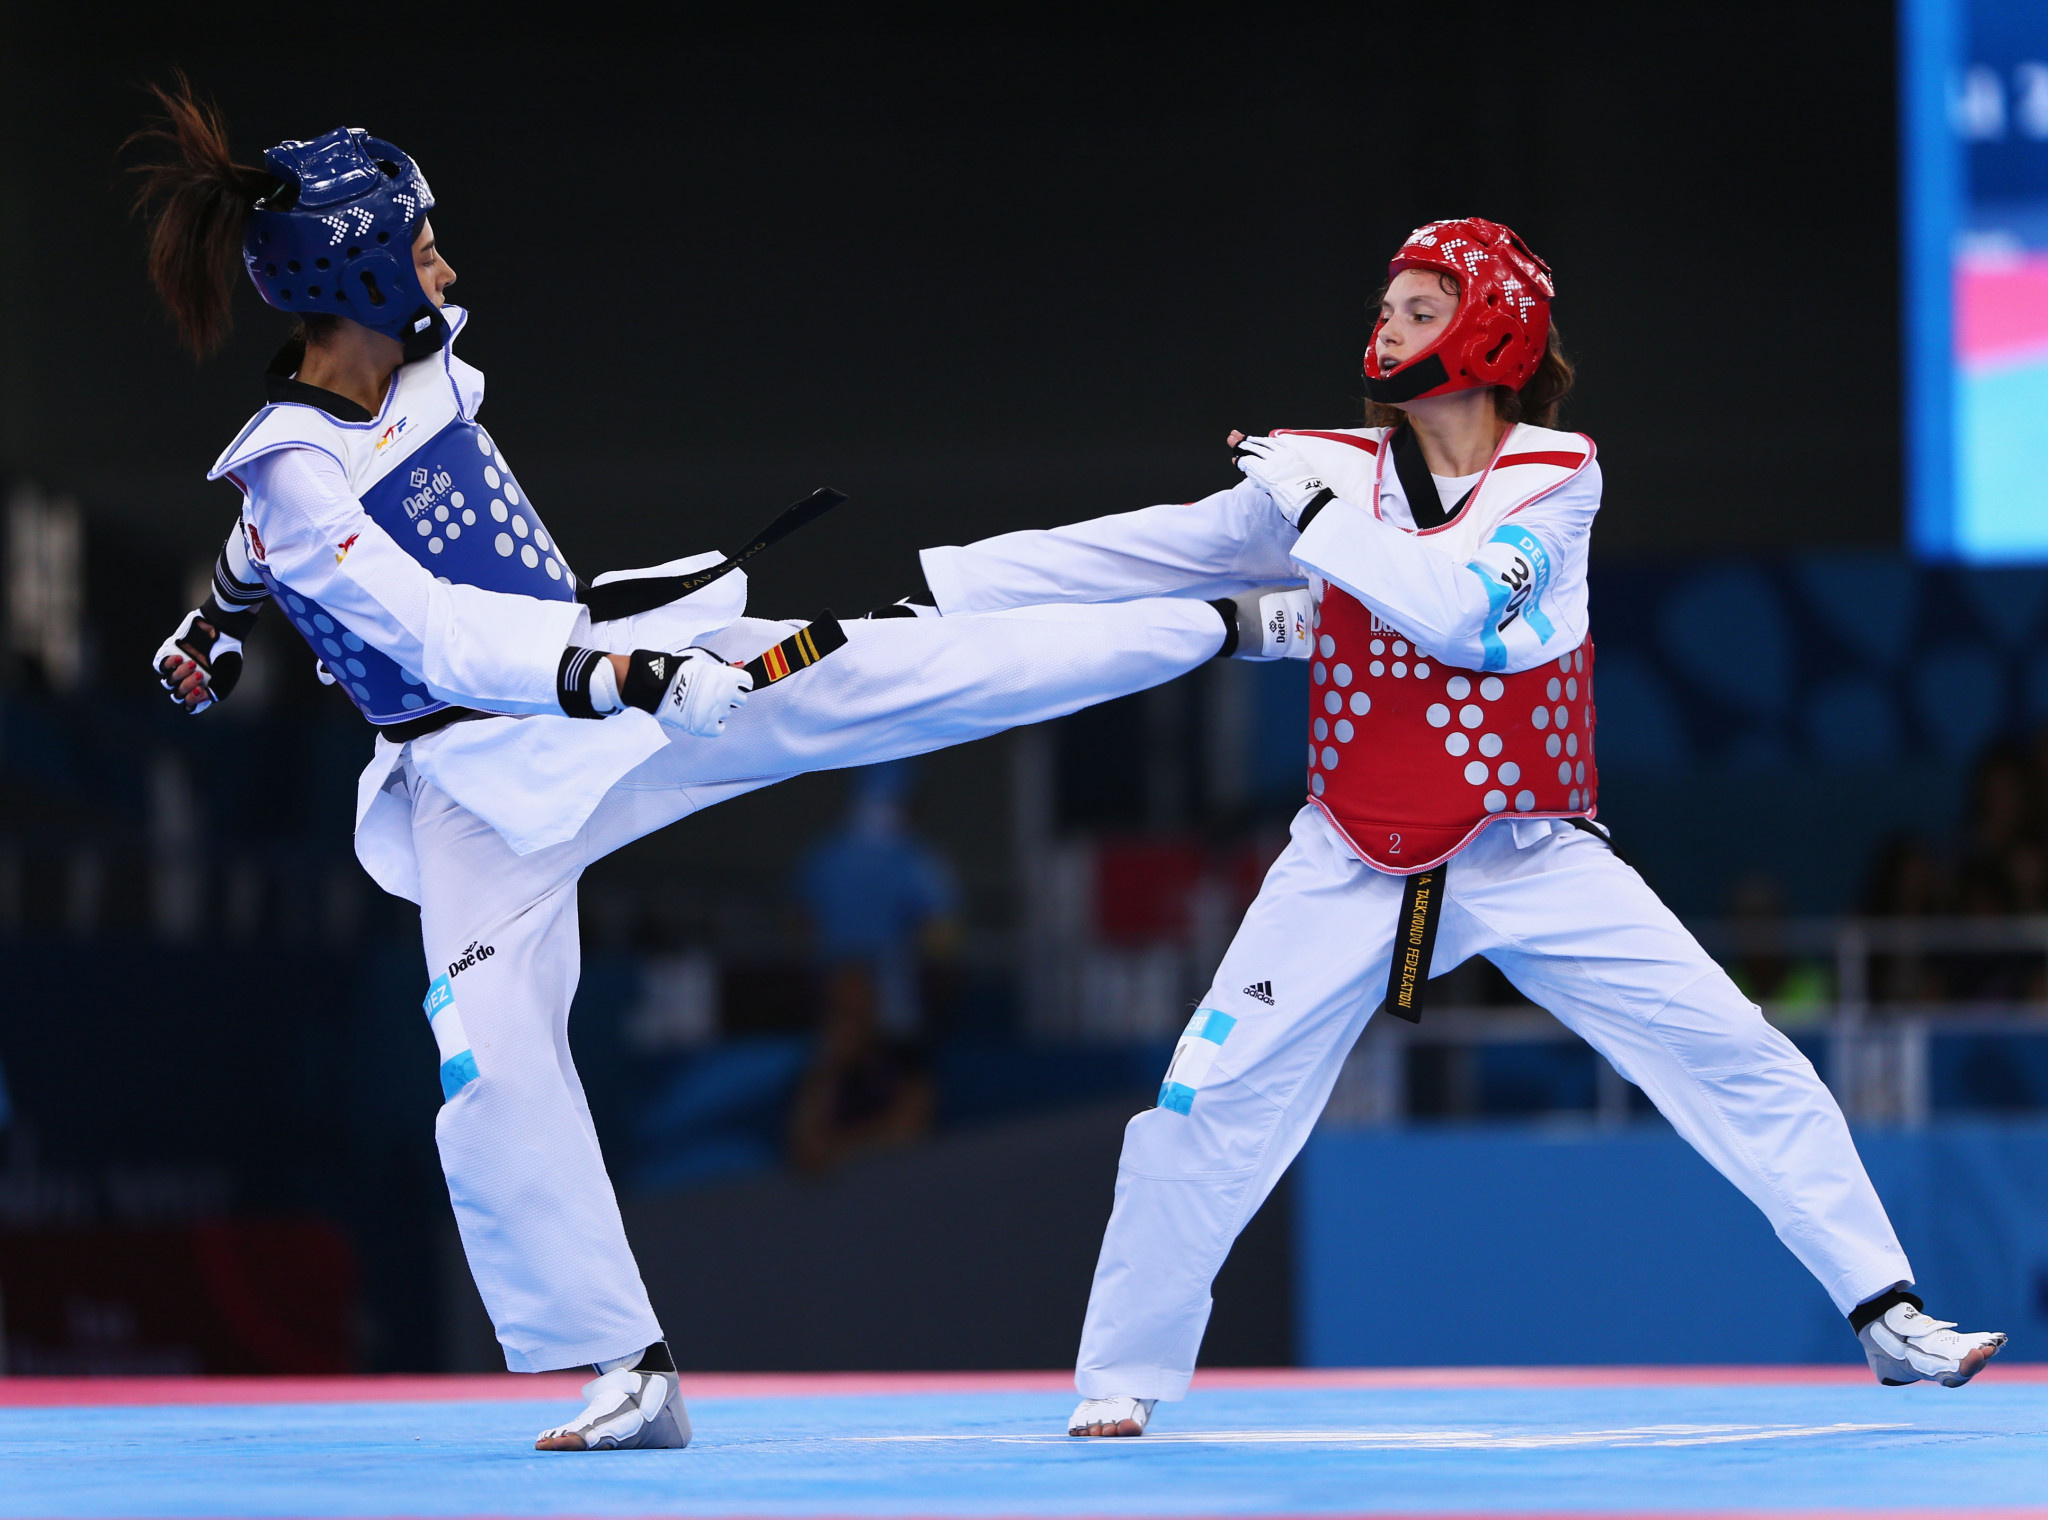 Pakistan's first taekwondo tournament, Government initiative, Promoting martial arts, Athletes in action, 2050x1520 HD Desktop